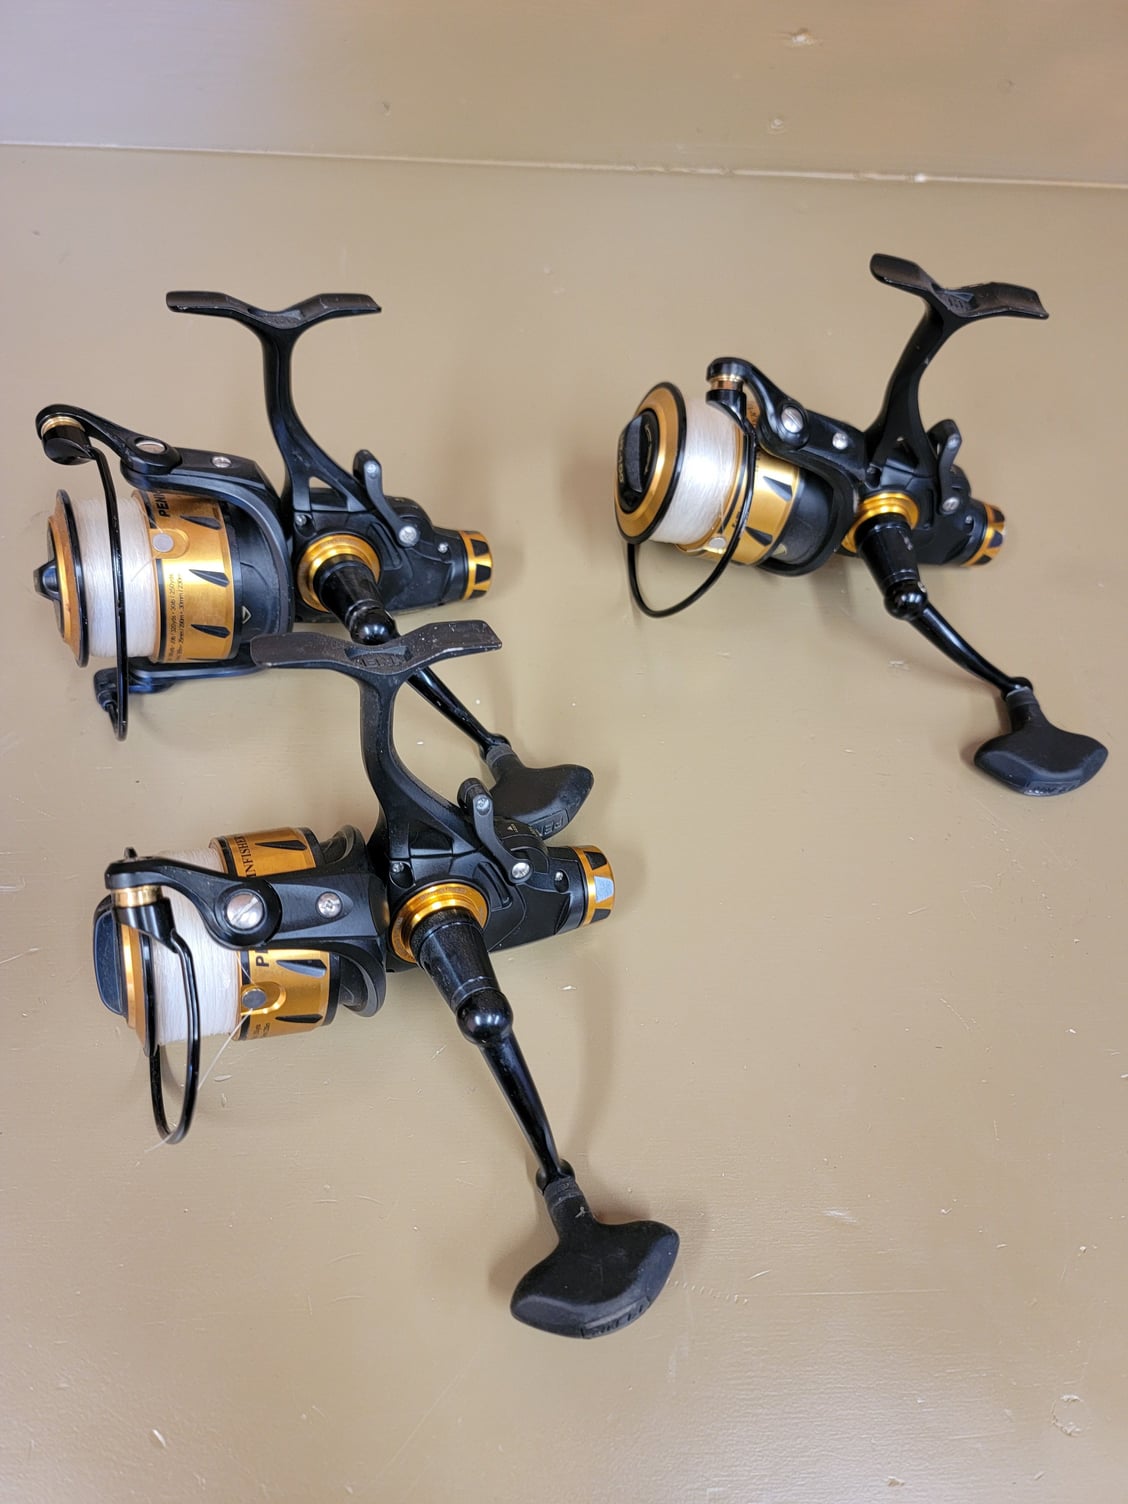 All like new reels - The Hull Truth - Boating and Fishing Forum